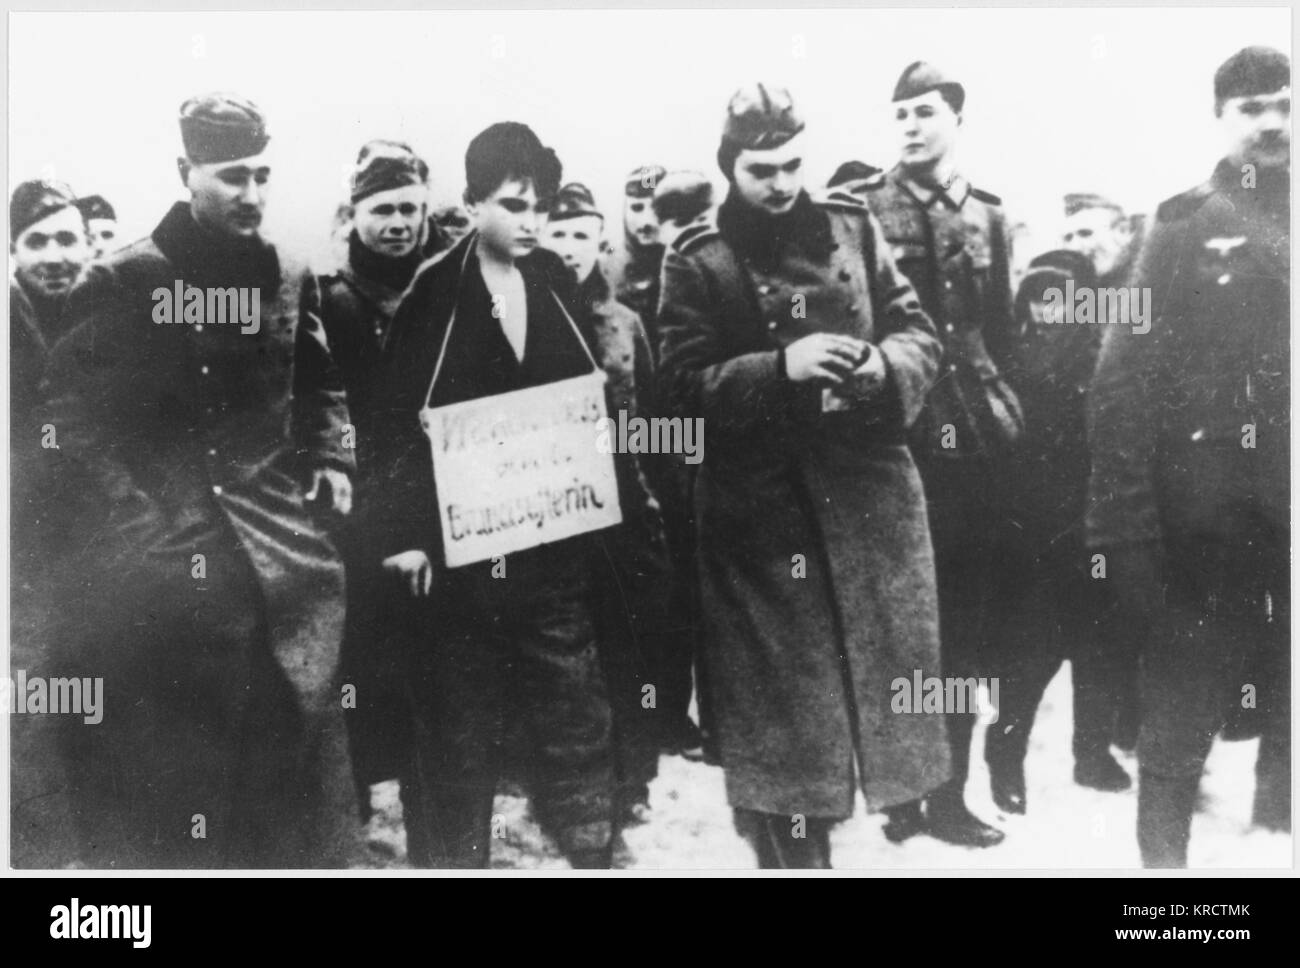 Zoia Kosmodemianskaya, accused of collaboration with the Nazi occupying forces, is tried and condemned by a court of locals and partisans, and taken to be hanged (photo 1 of 2) Date: 1941 Stock Photo